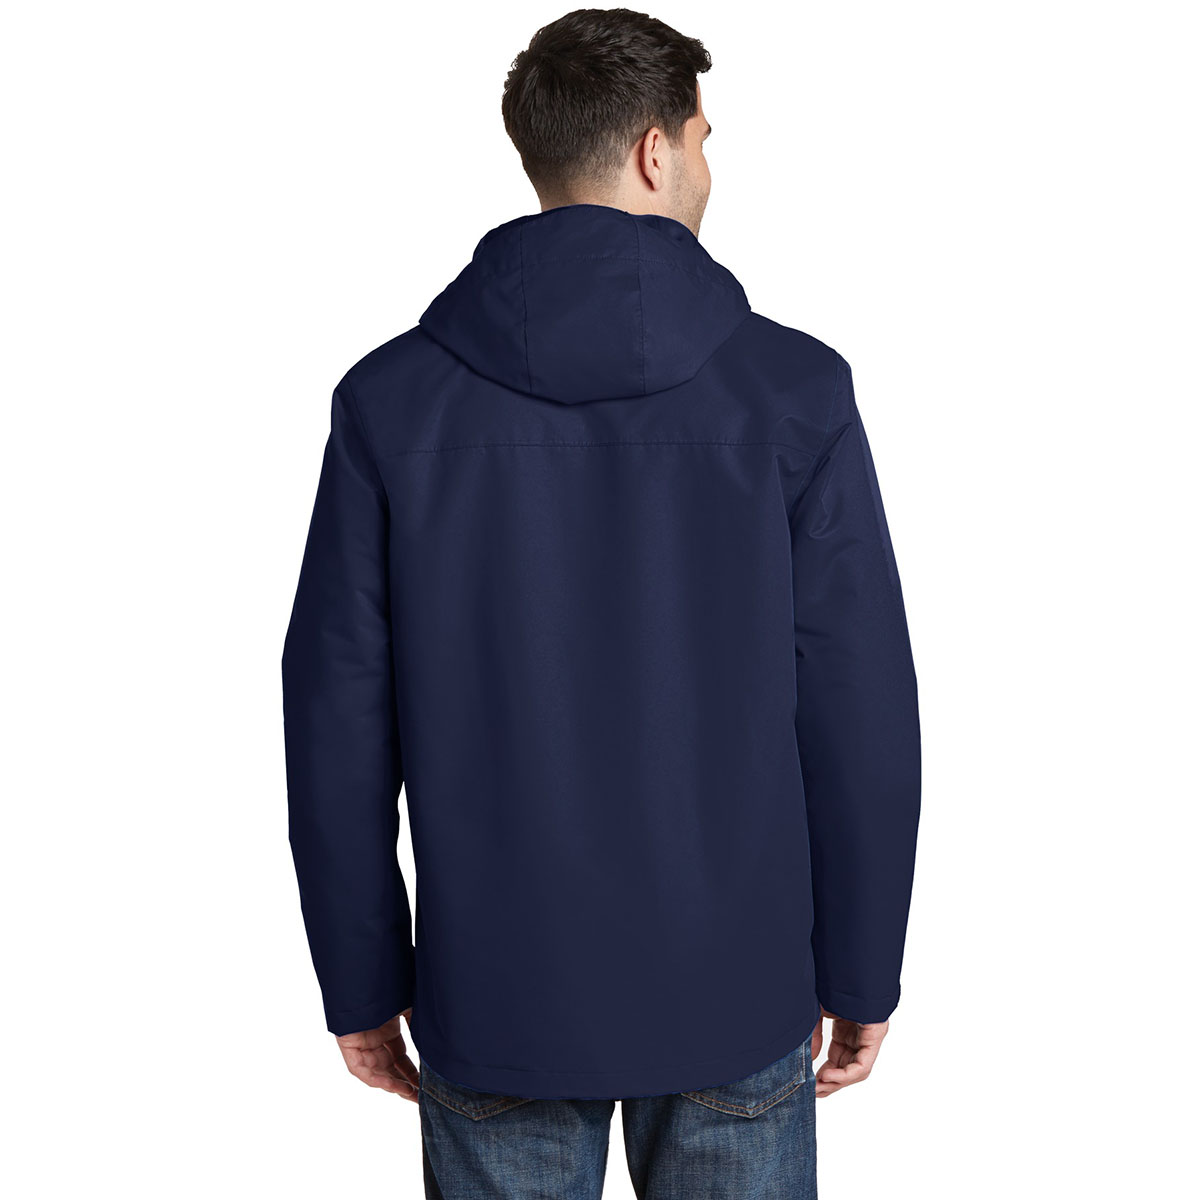 Port Authority J331 All-Conditions Jacket - True Navy | Full Source